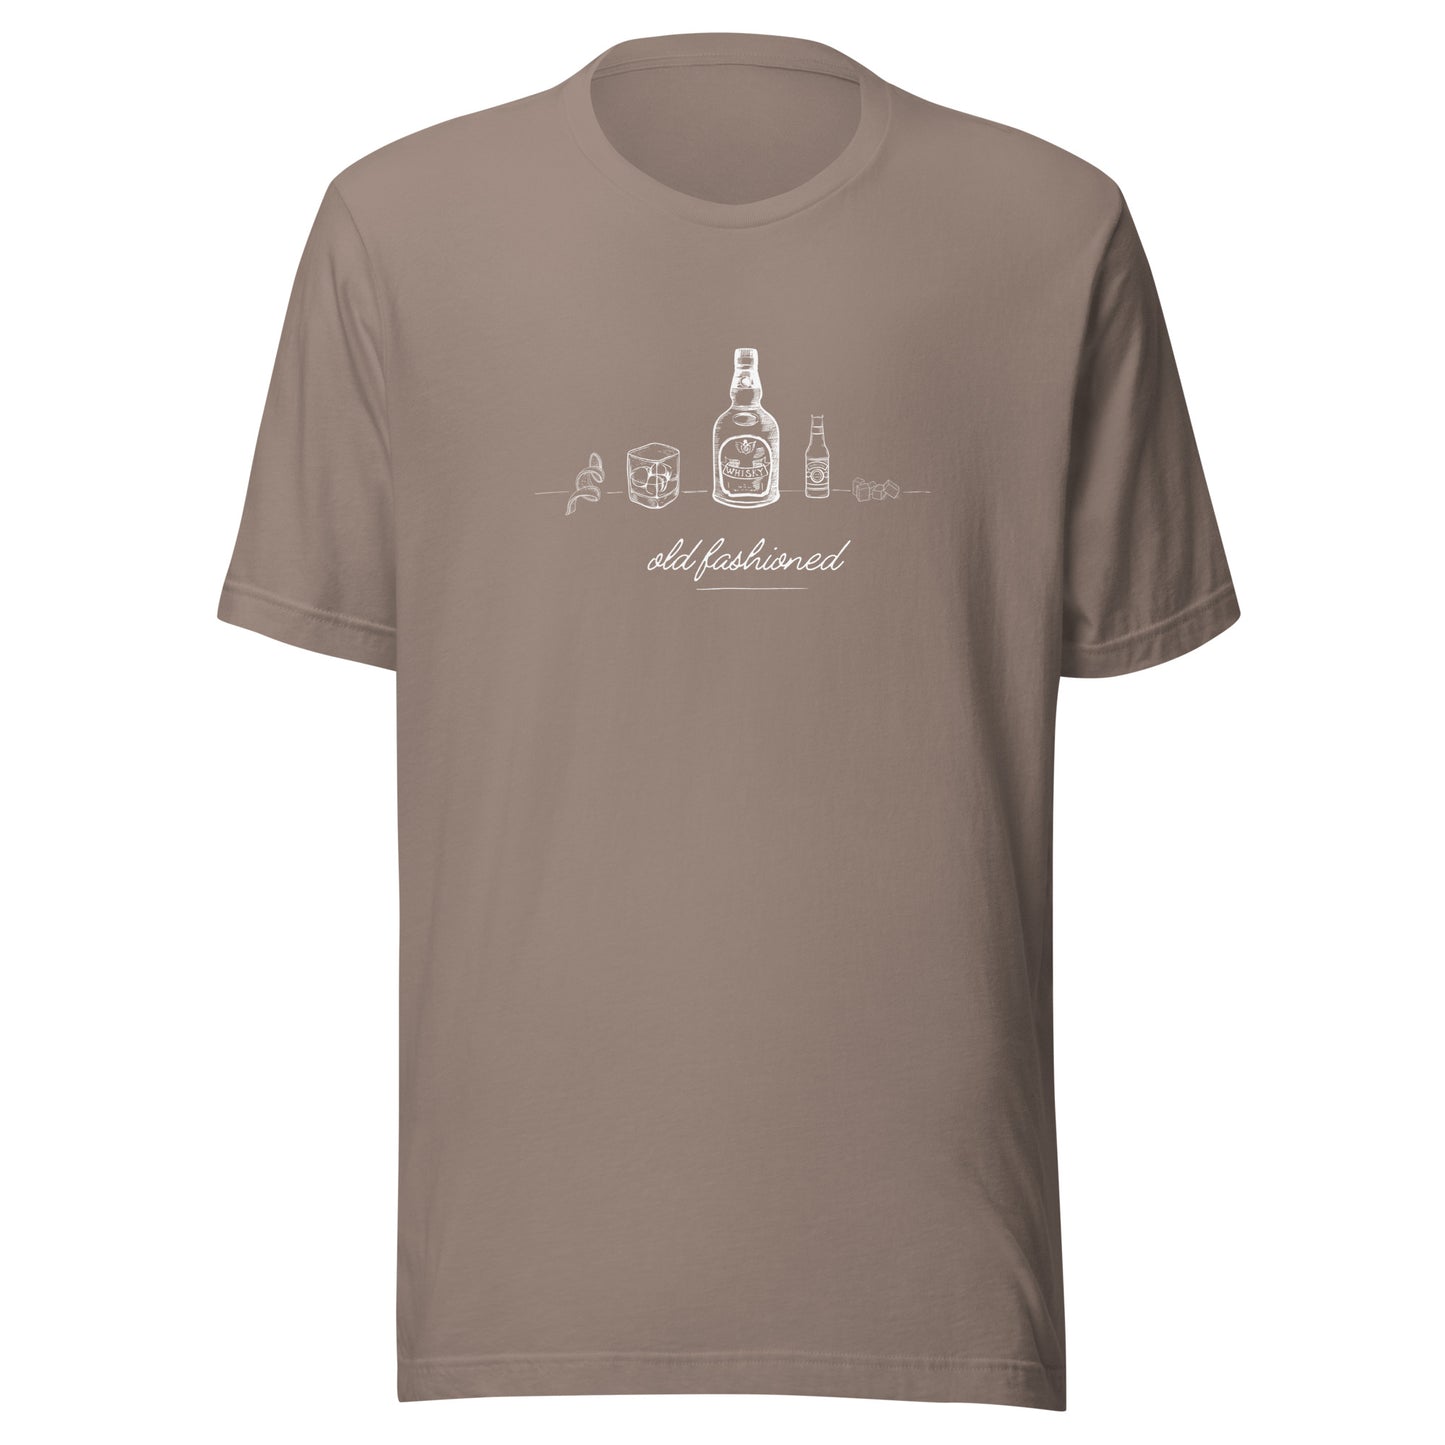 "Old Fashioned" Cocktail T-Shirt